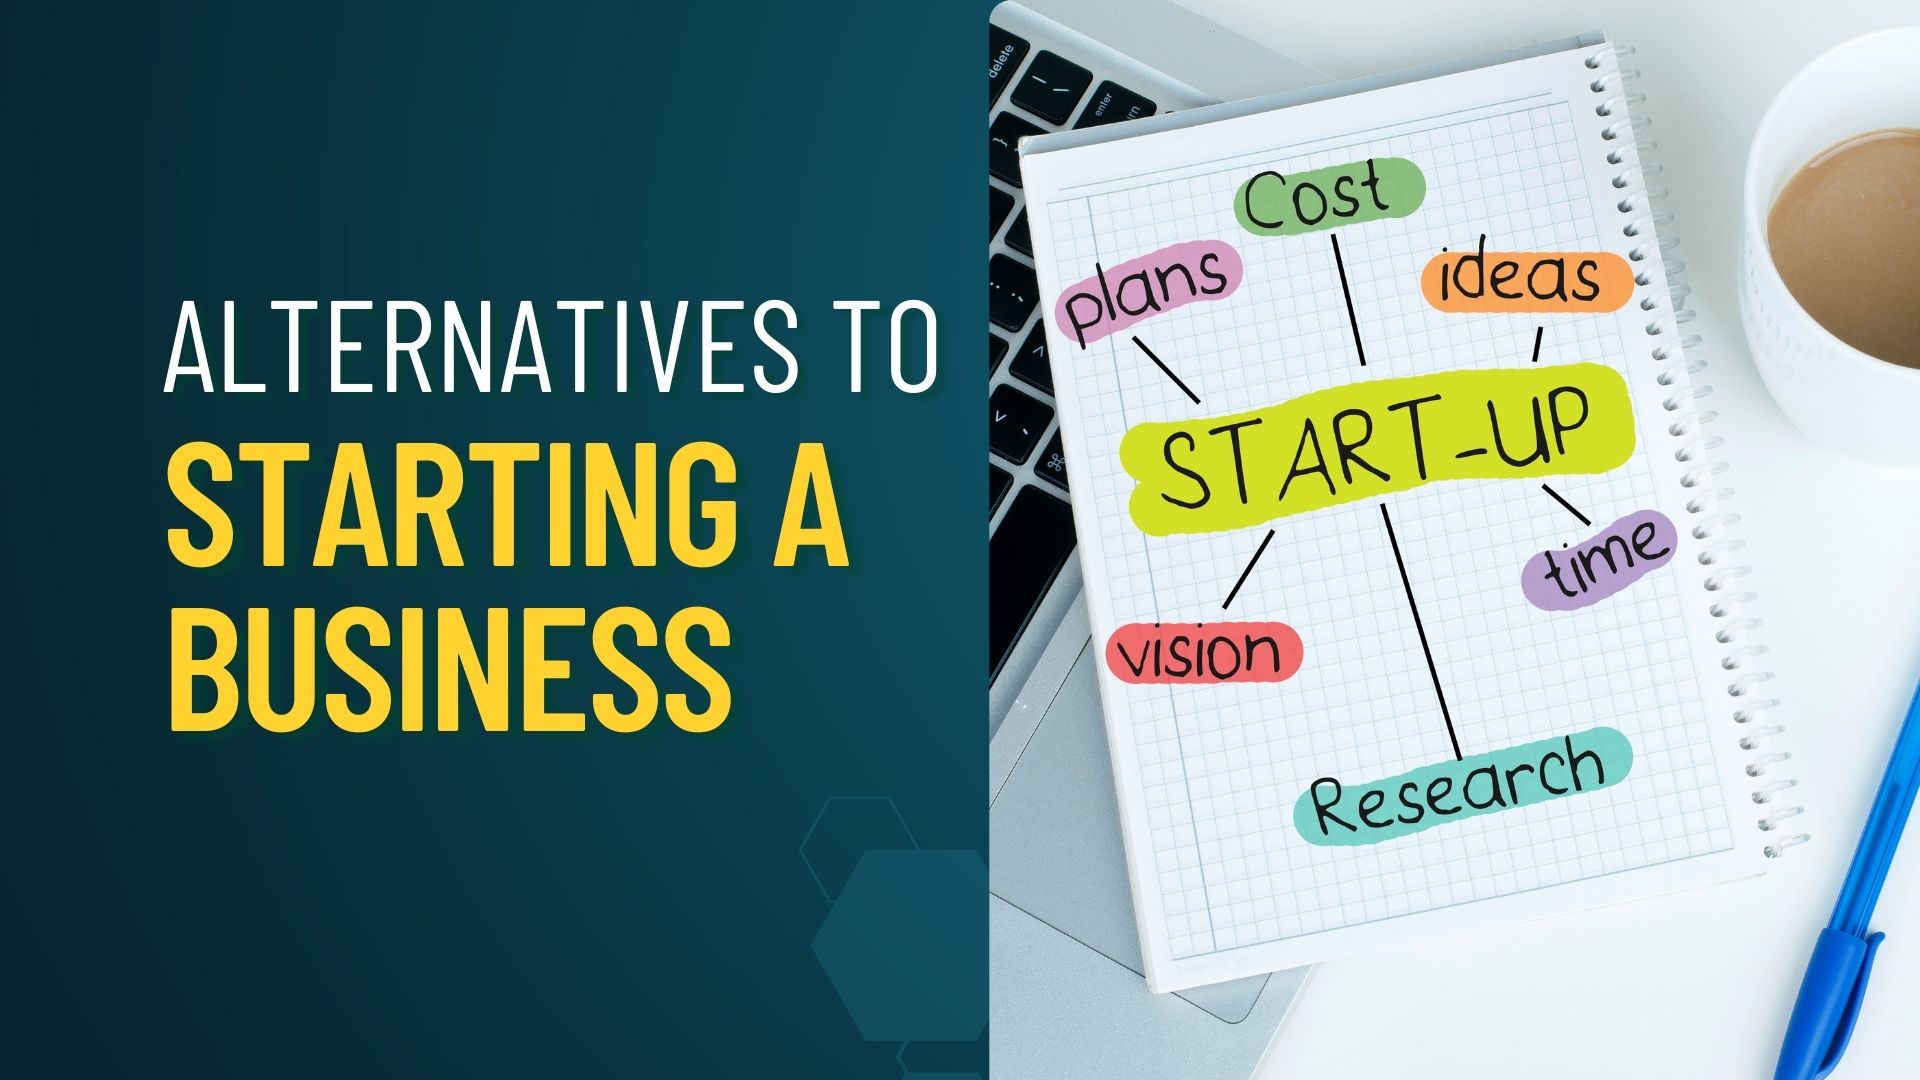 Alternatives to Starting a Business